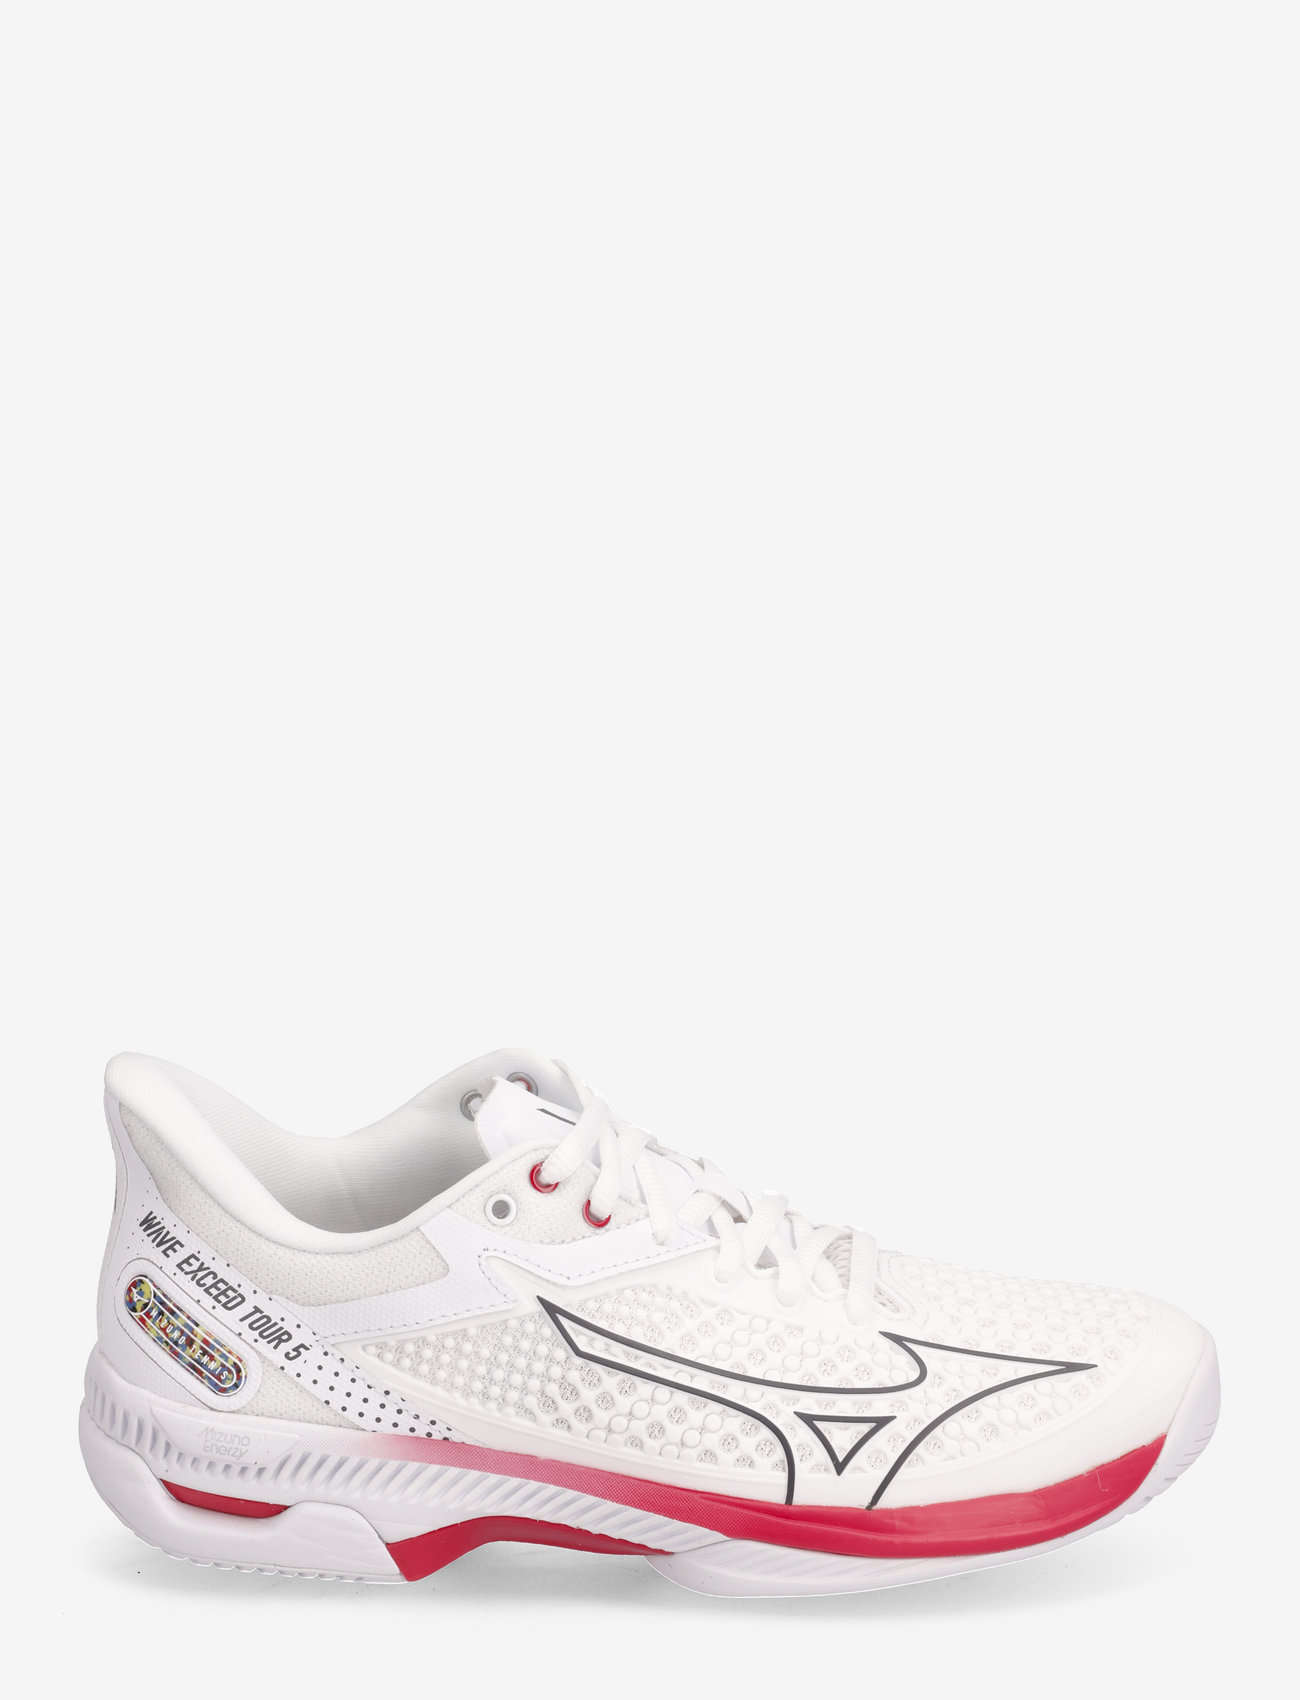 Mizuno - WAVE EXCEED TOUR 5AC(W) - racketsports shoes - undyed white/quiet shade/opera red - 1